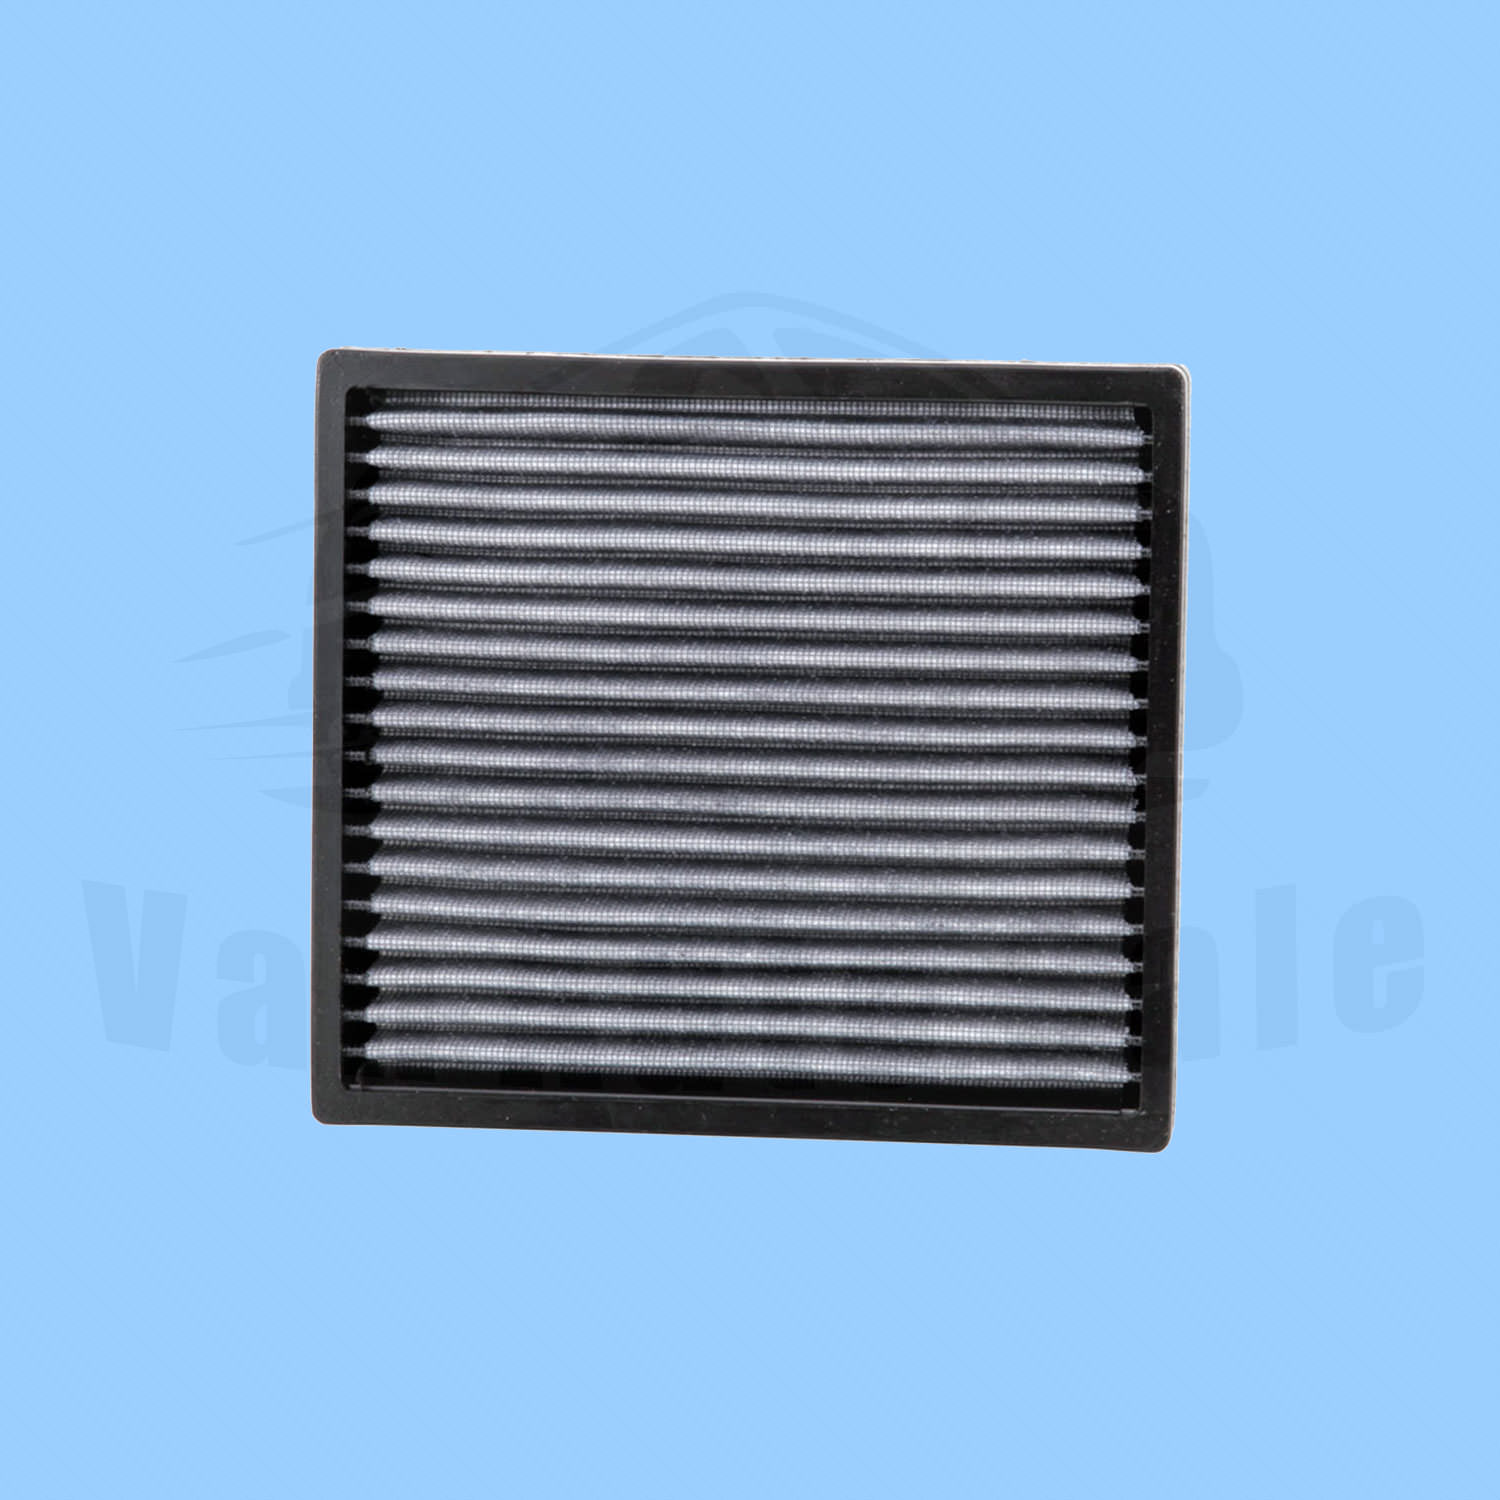 Cabin Air Filter K&N for Toyota Tundra 2007-2020 | eBay Cabin Air Filter For 2007 Toyota Tundra